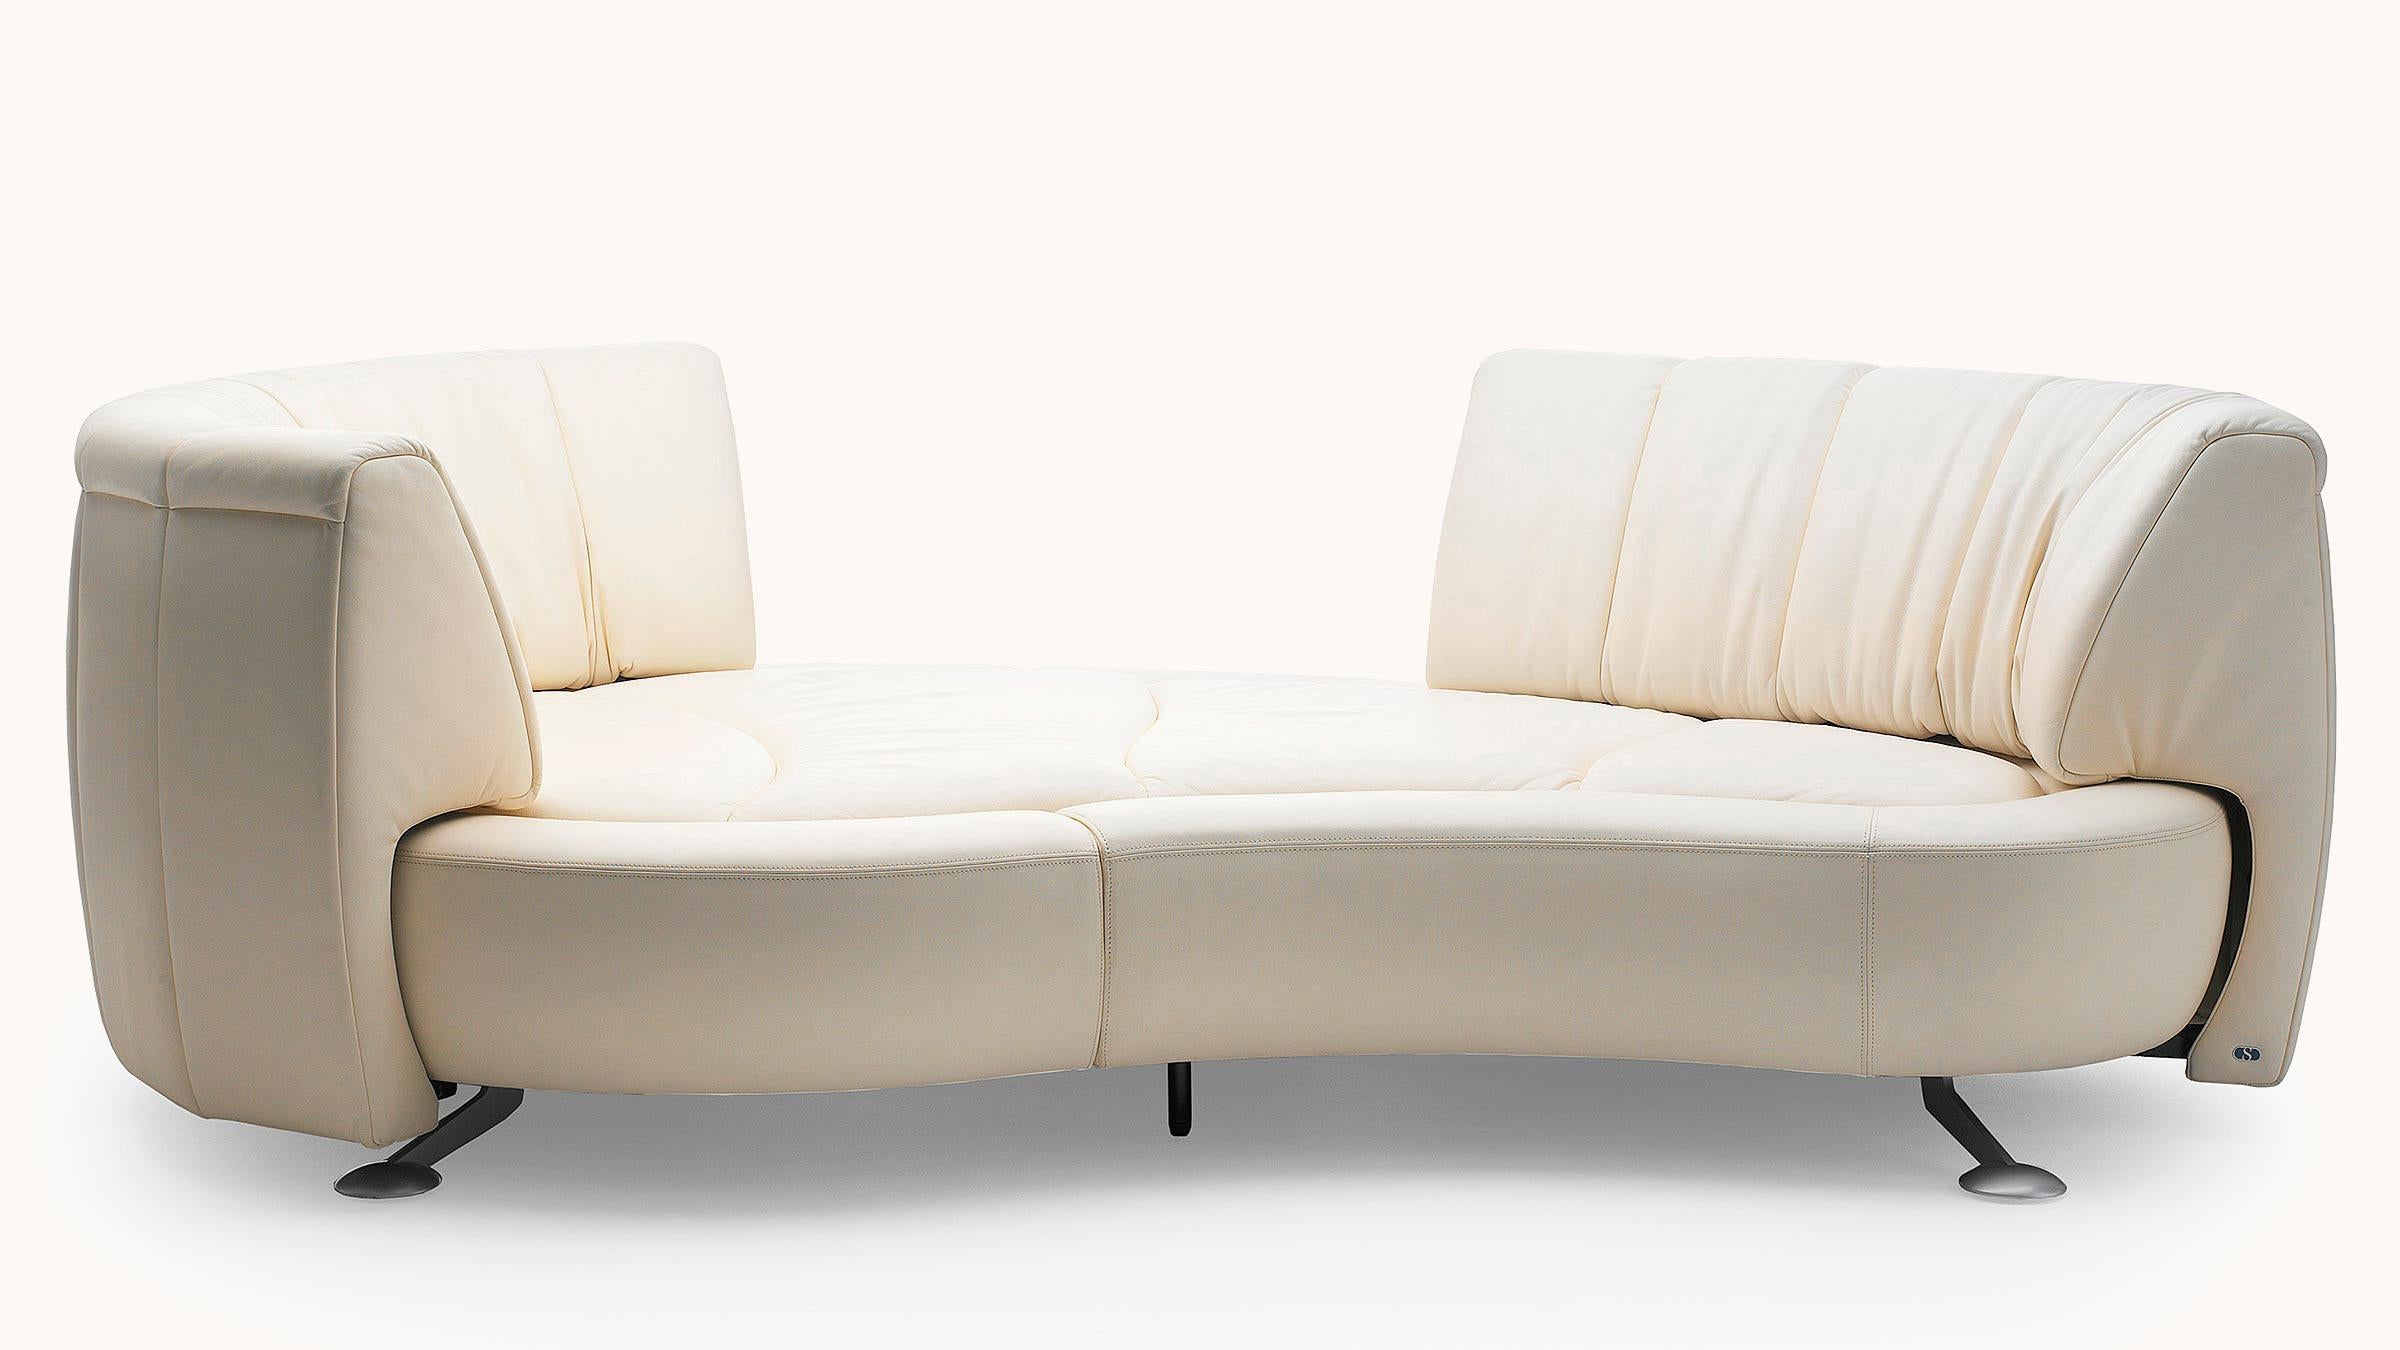 Revolutionary back-push mechanism DS-164 can be transformed from an open sofa into an elegant chaise longue in a single movement, while the backrest can be stylefull rotated infinitely by 360°. The modular seat island, presented in organic curves,